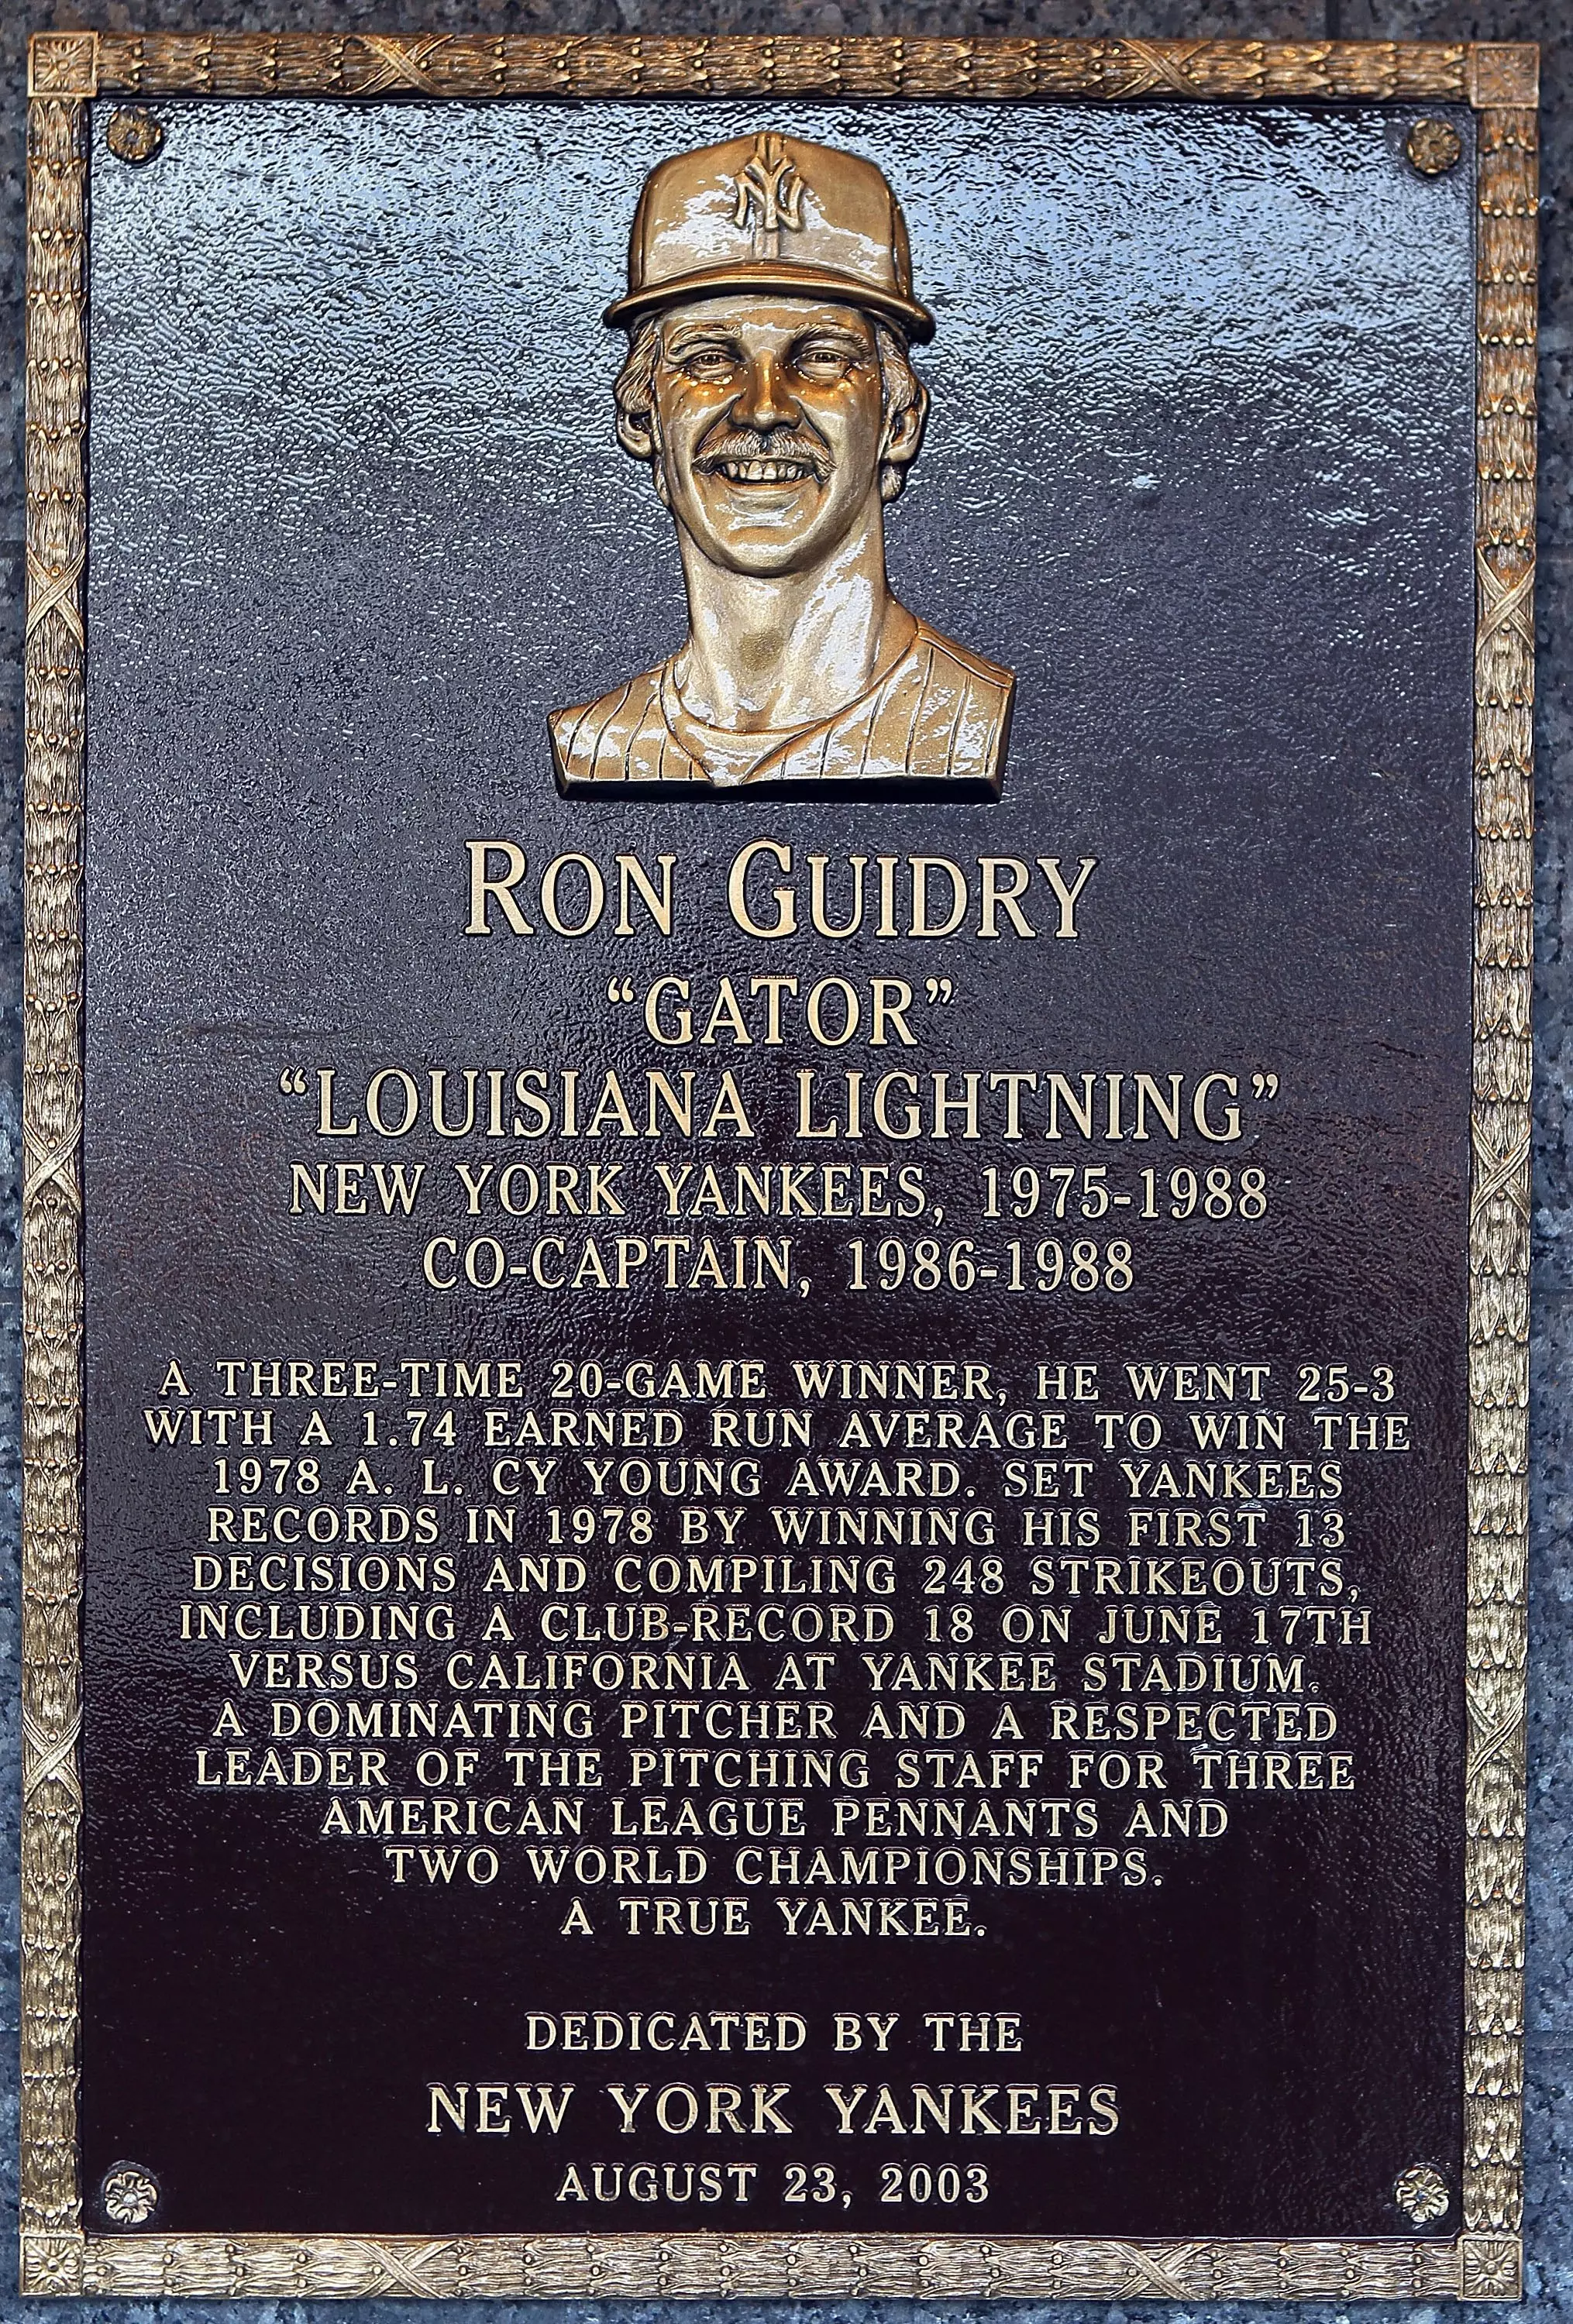 Ron Guidry World Series games airing on MLB Network